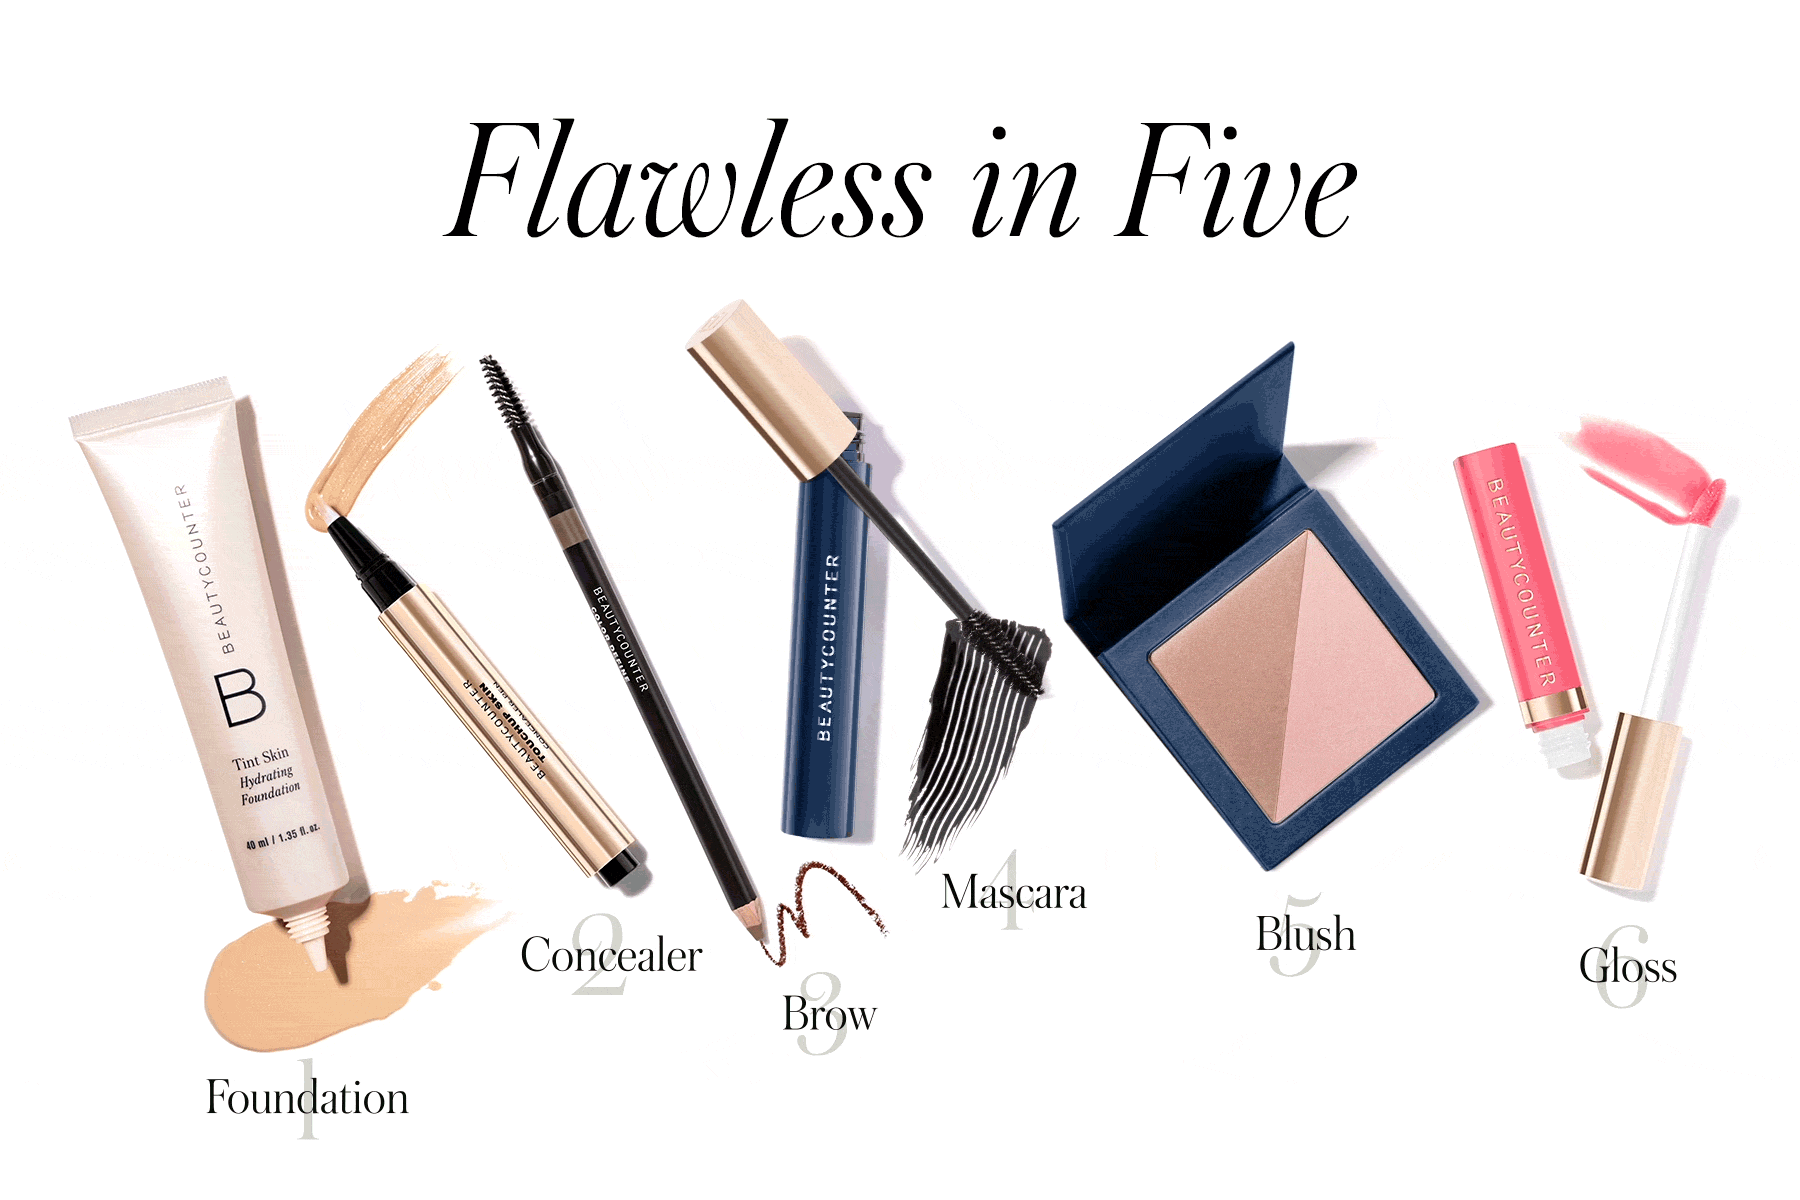 Flawless in Five BeautyCounter Review